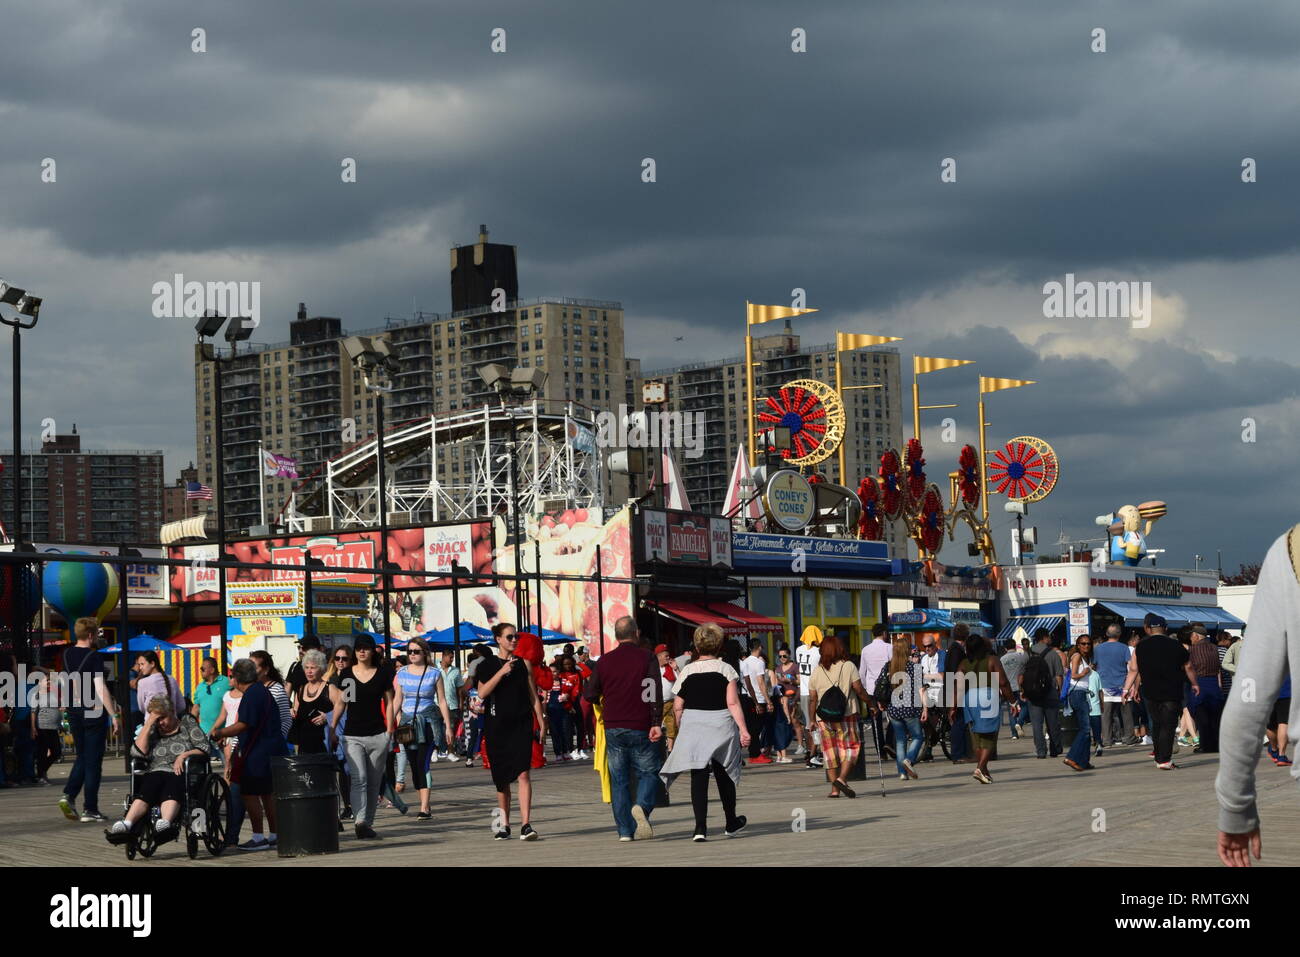 coney island boardwalk with storm clouds Stock Photo